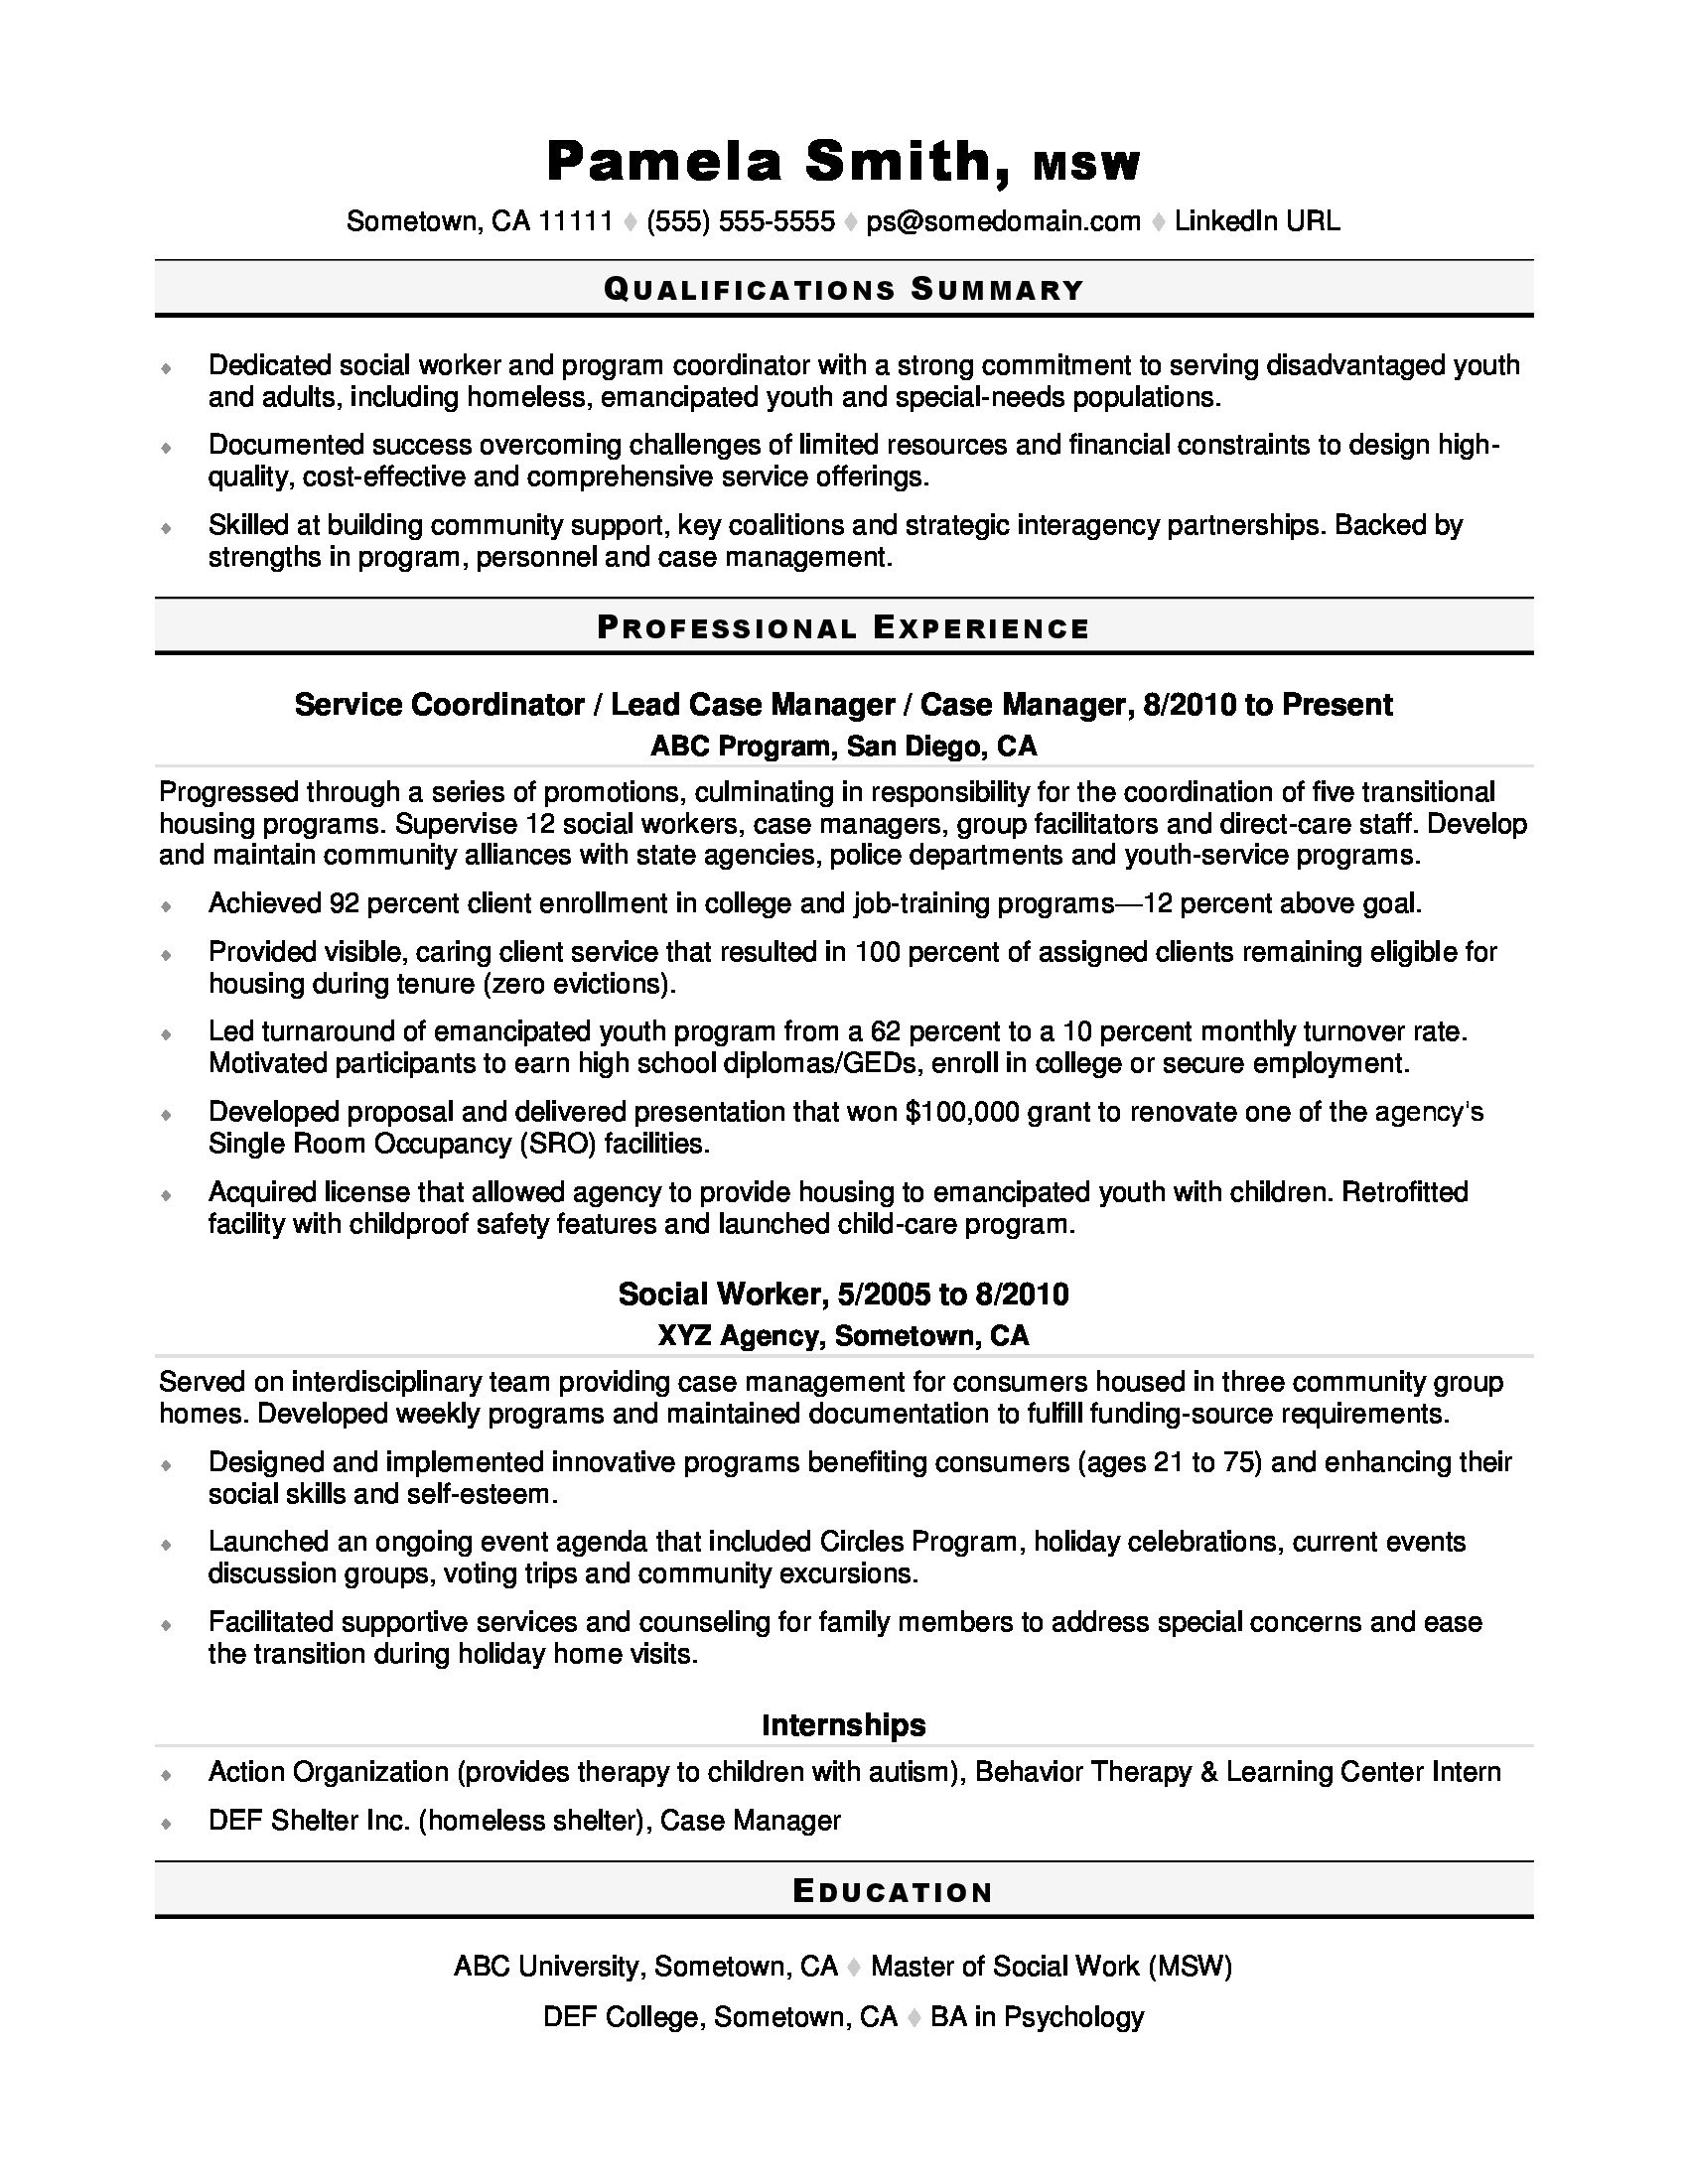 Resume Sample for Working withfor Behaviorial Adults and Youth social Work Resume Monster.com